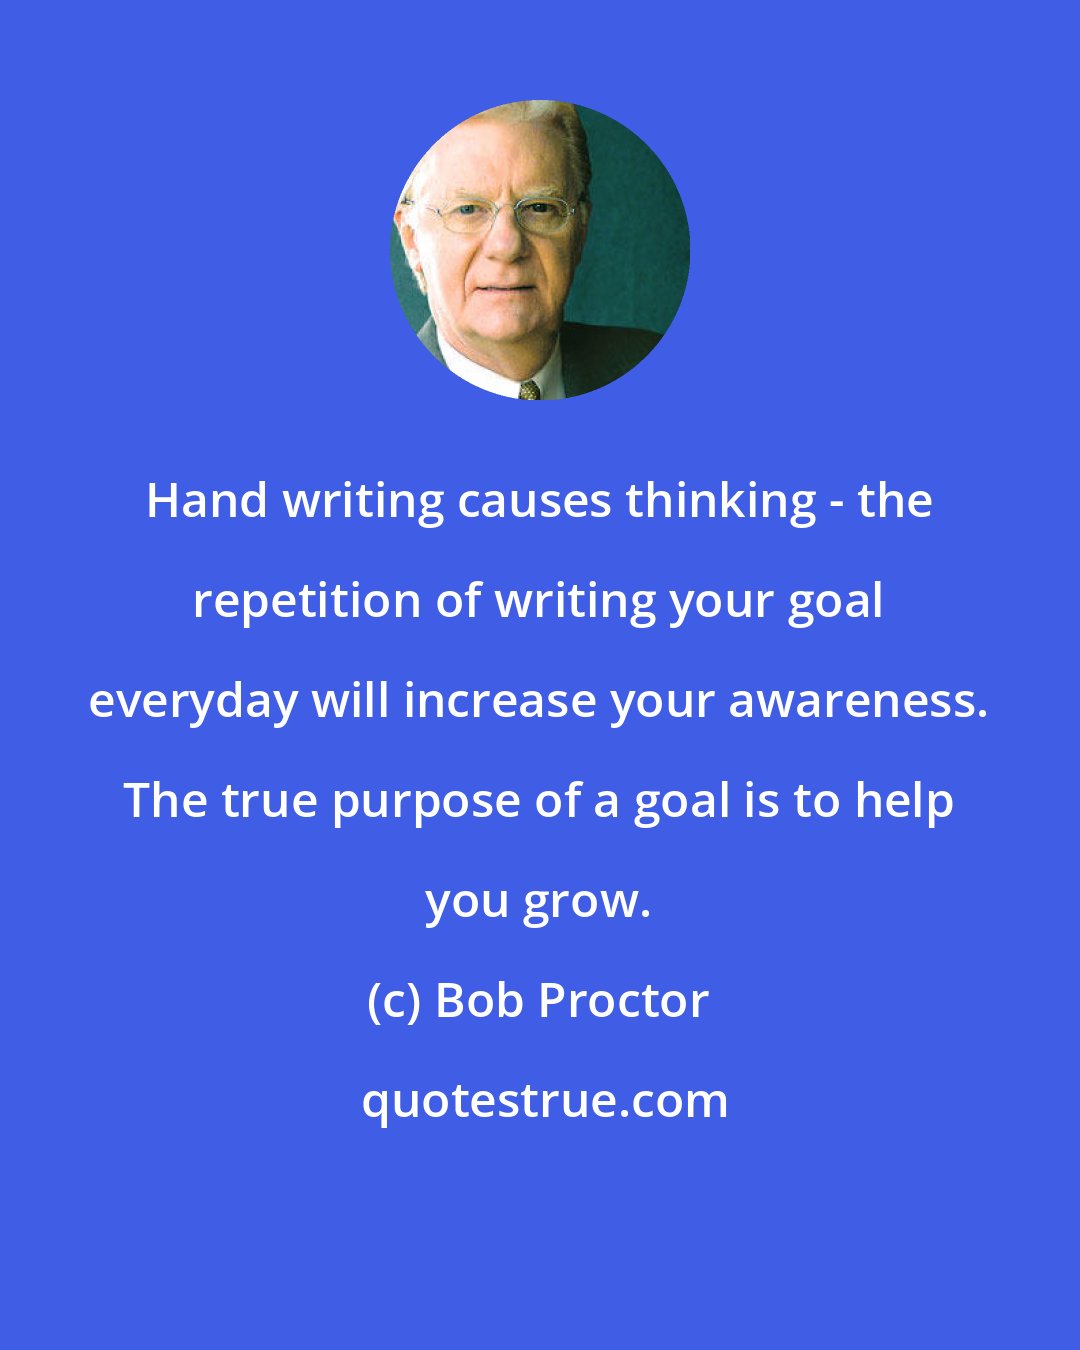 Bob Proctor: Hand writing causes thinking - the repetition of writing your goal everyday will increase your awareness. The true purpose of a goal is to help you grow.